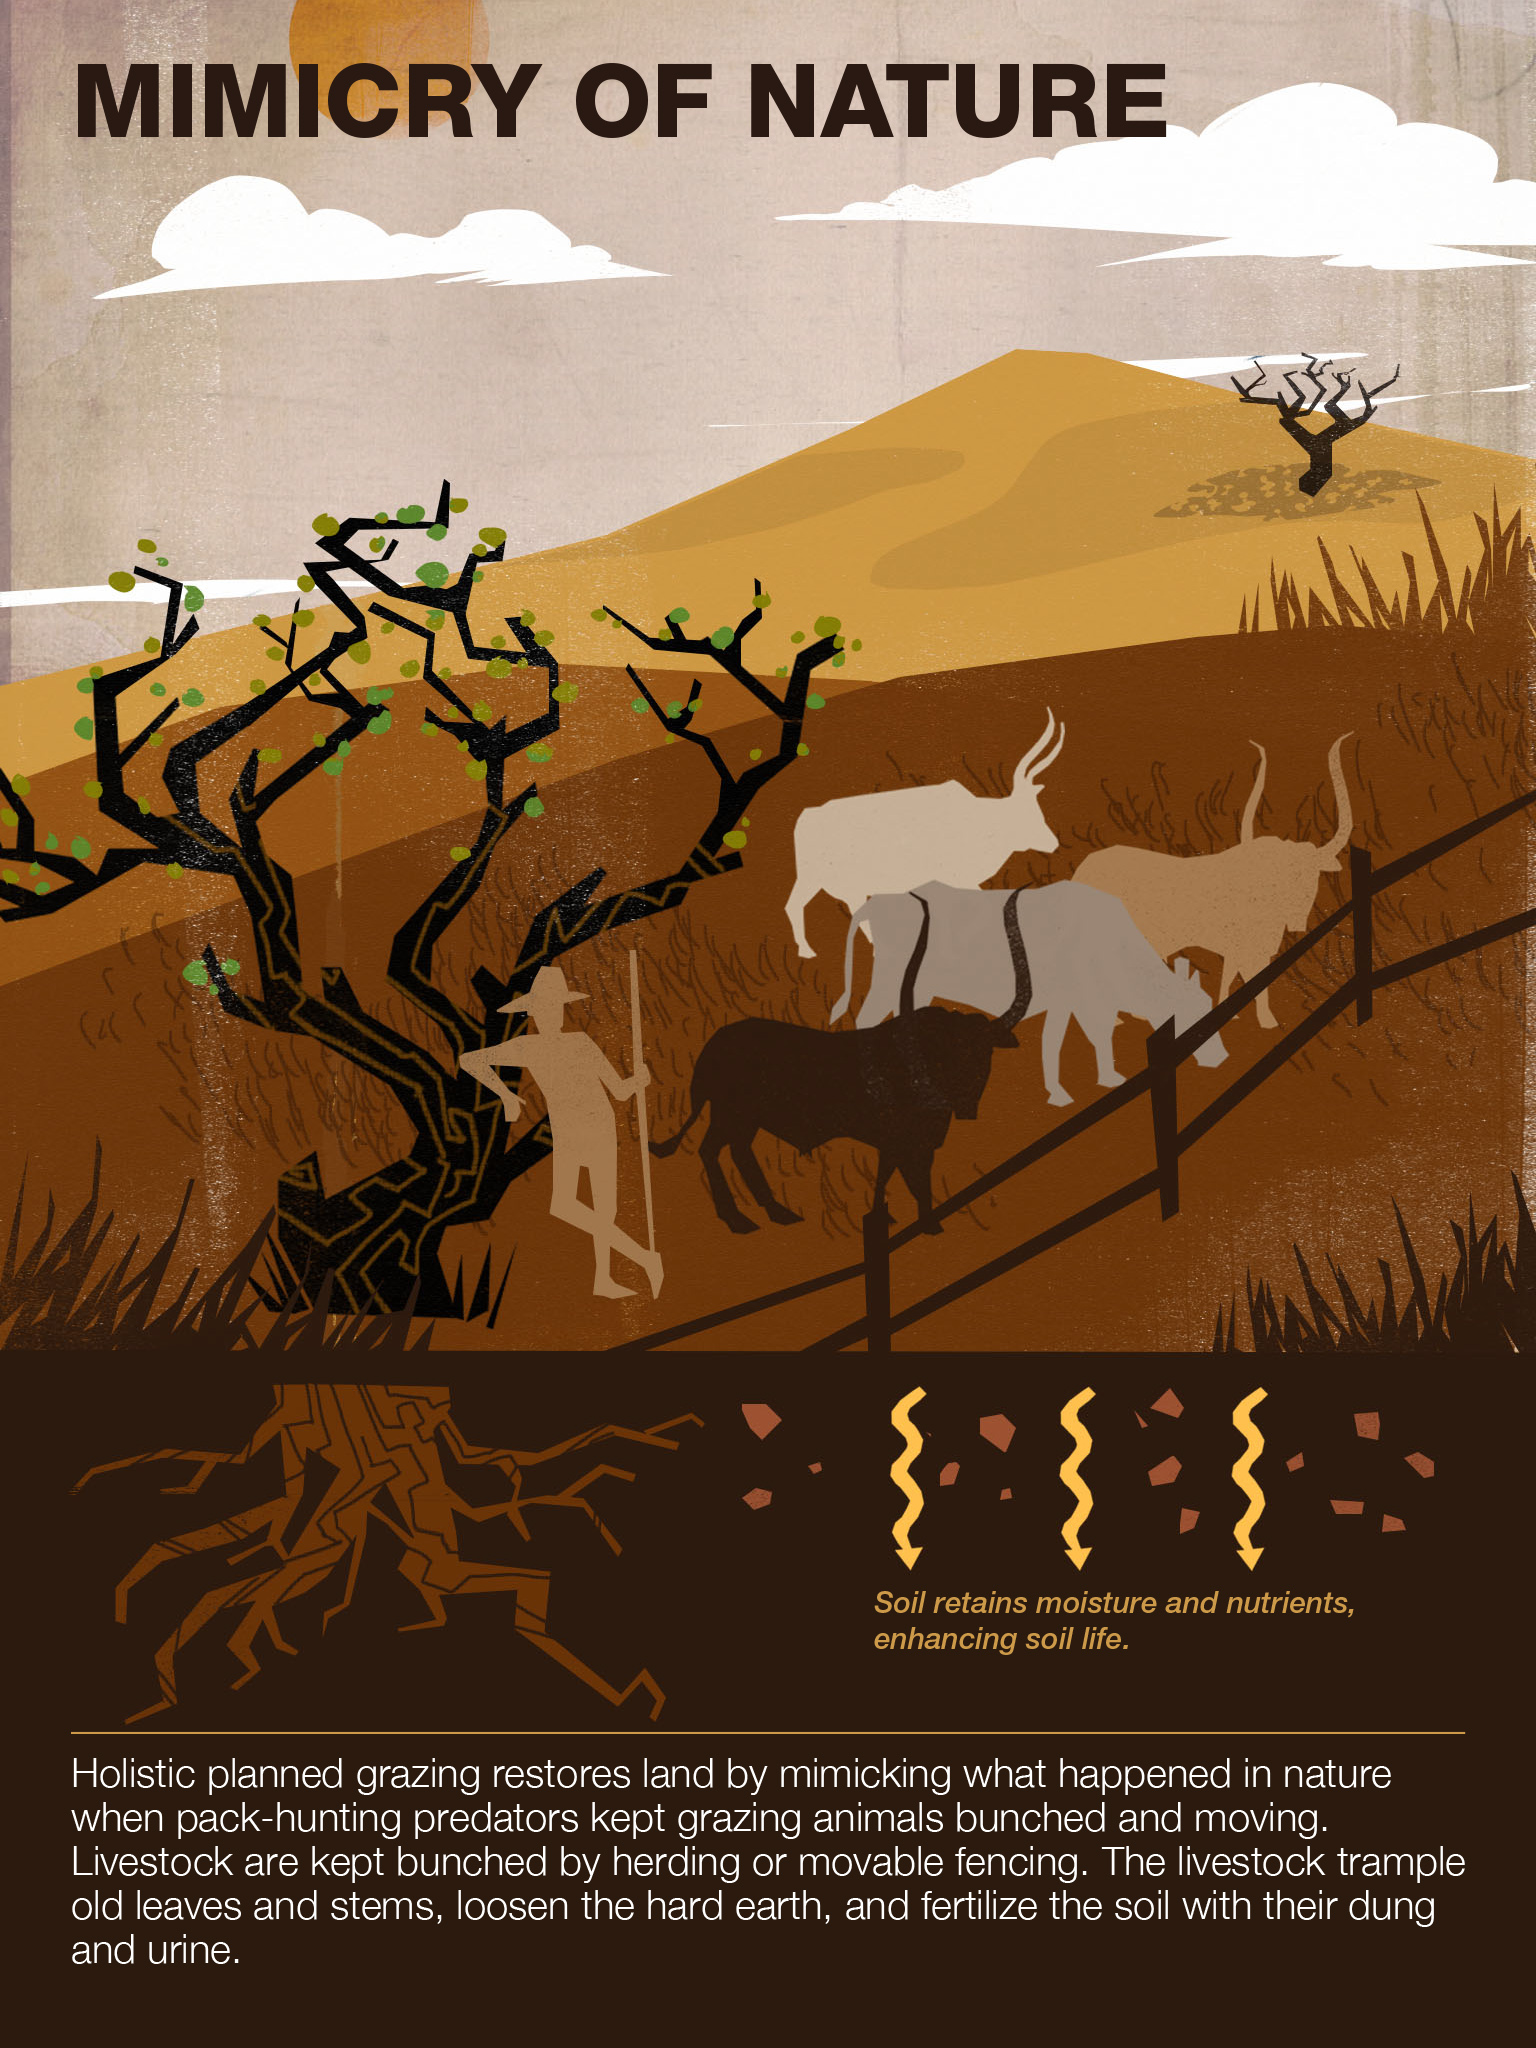 Mimicry of nature. A look at what Savory's holistic management strategy aims to accomplish.